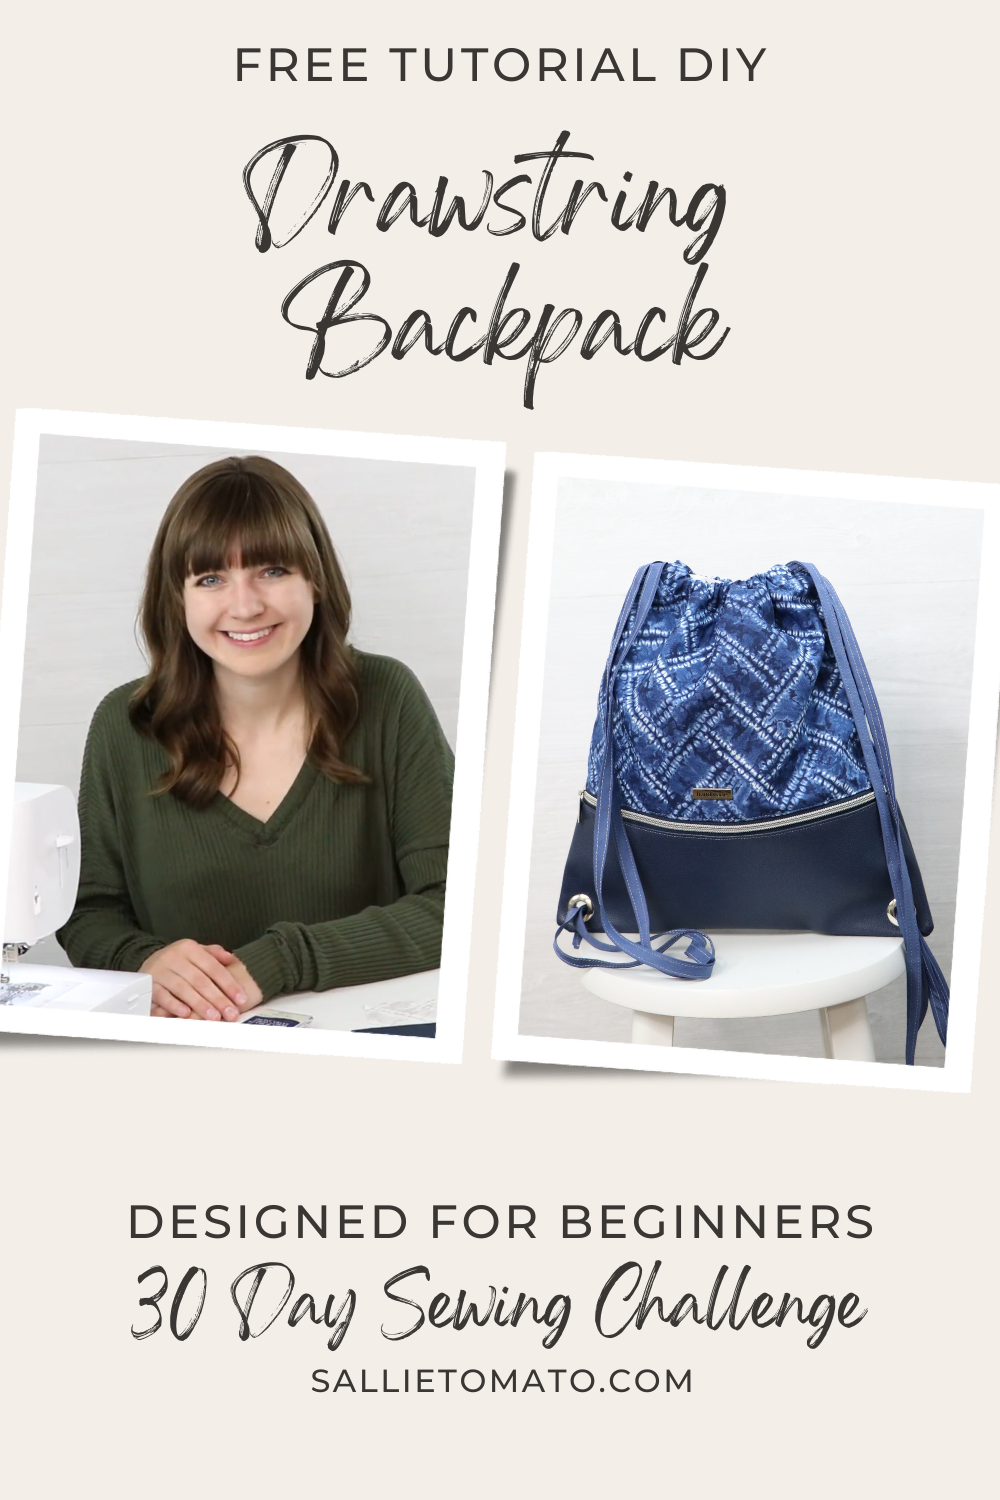 DIY Drawstring Backpack Tutorial | Days 21-24 of 30 Day Sewing Challenge